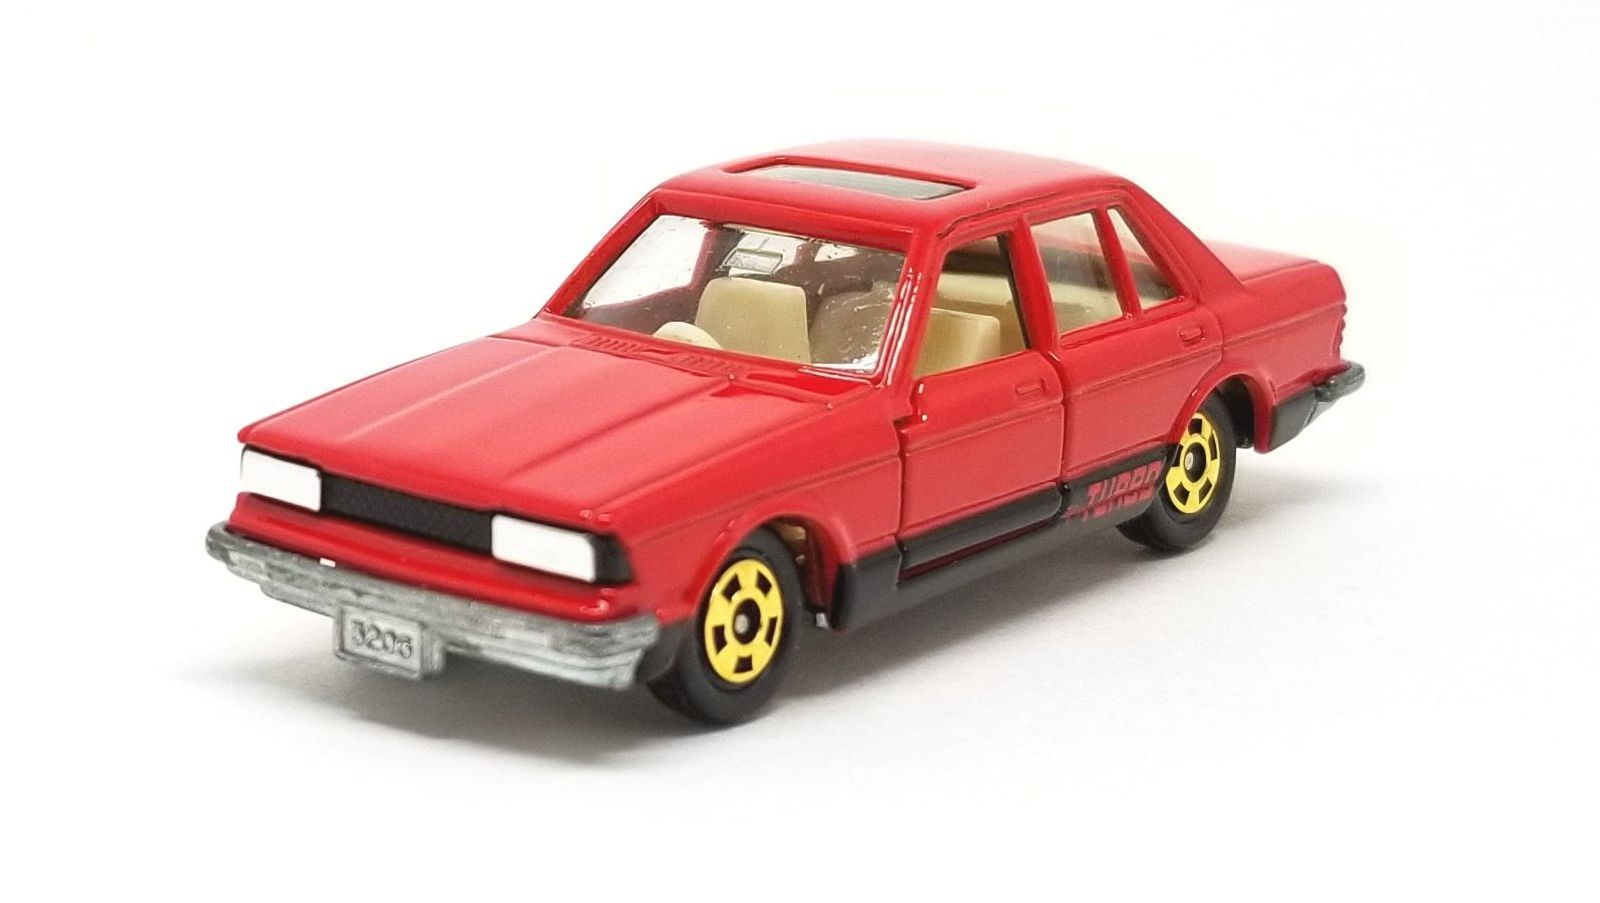 Illustration for article titled [REVIEW] Tomica Nissan Bluebird 1800 SSS-XG Turbo